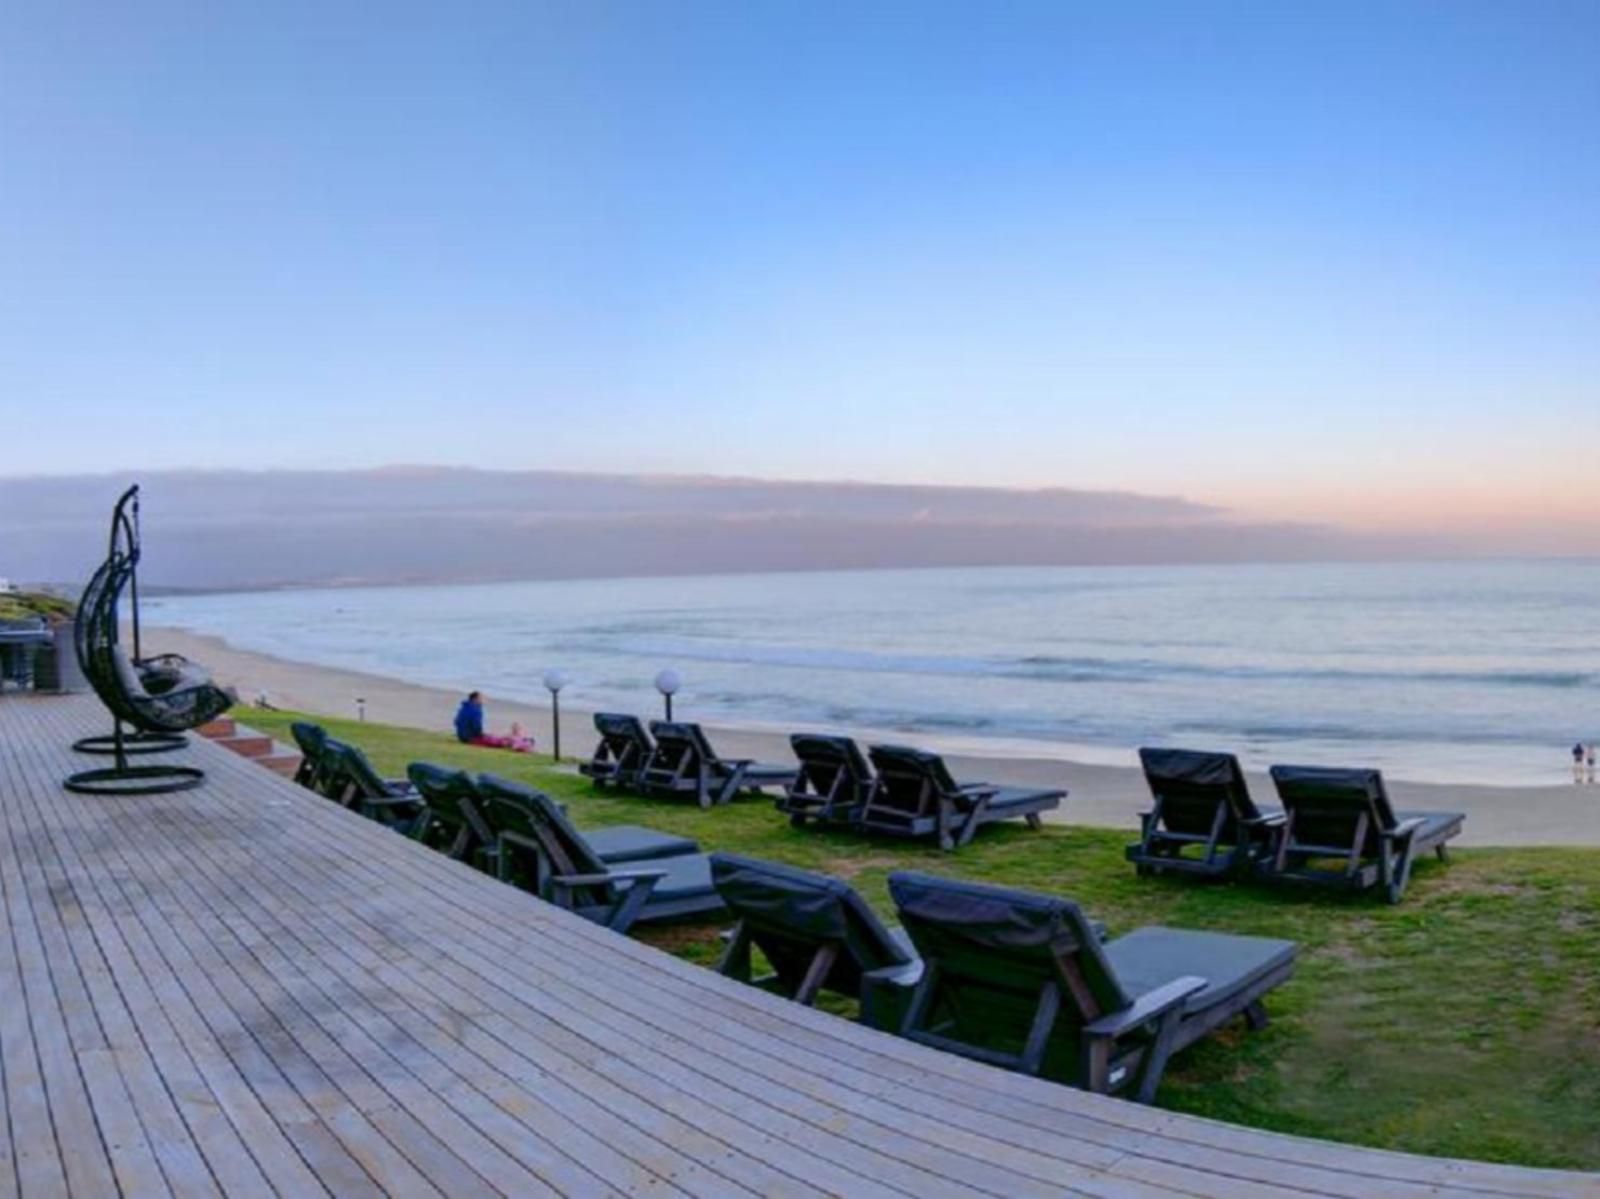 Bay Lodge Bay View Mossel Bay Western Cape South Africa Beach, Nature, Sand